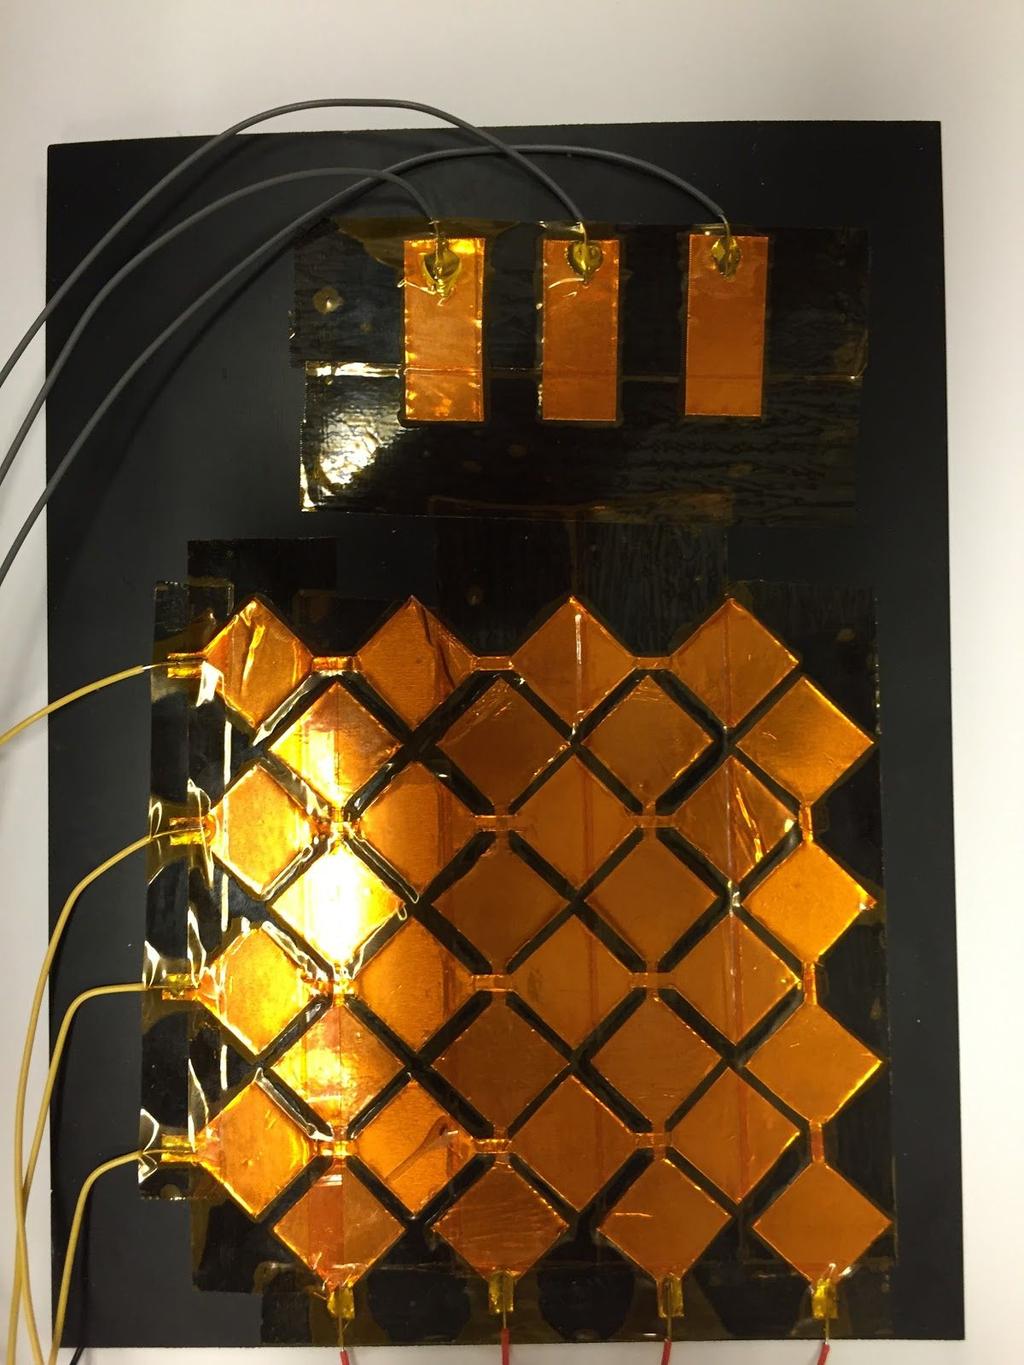 template. To isolate the capacitive plate from the user, the grid and pads were covered in Kapton Tape, a thin, transparent, and electrically insulating material.